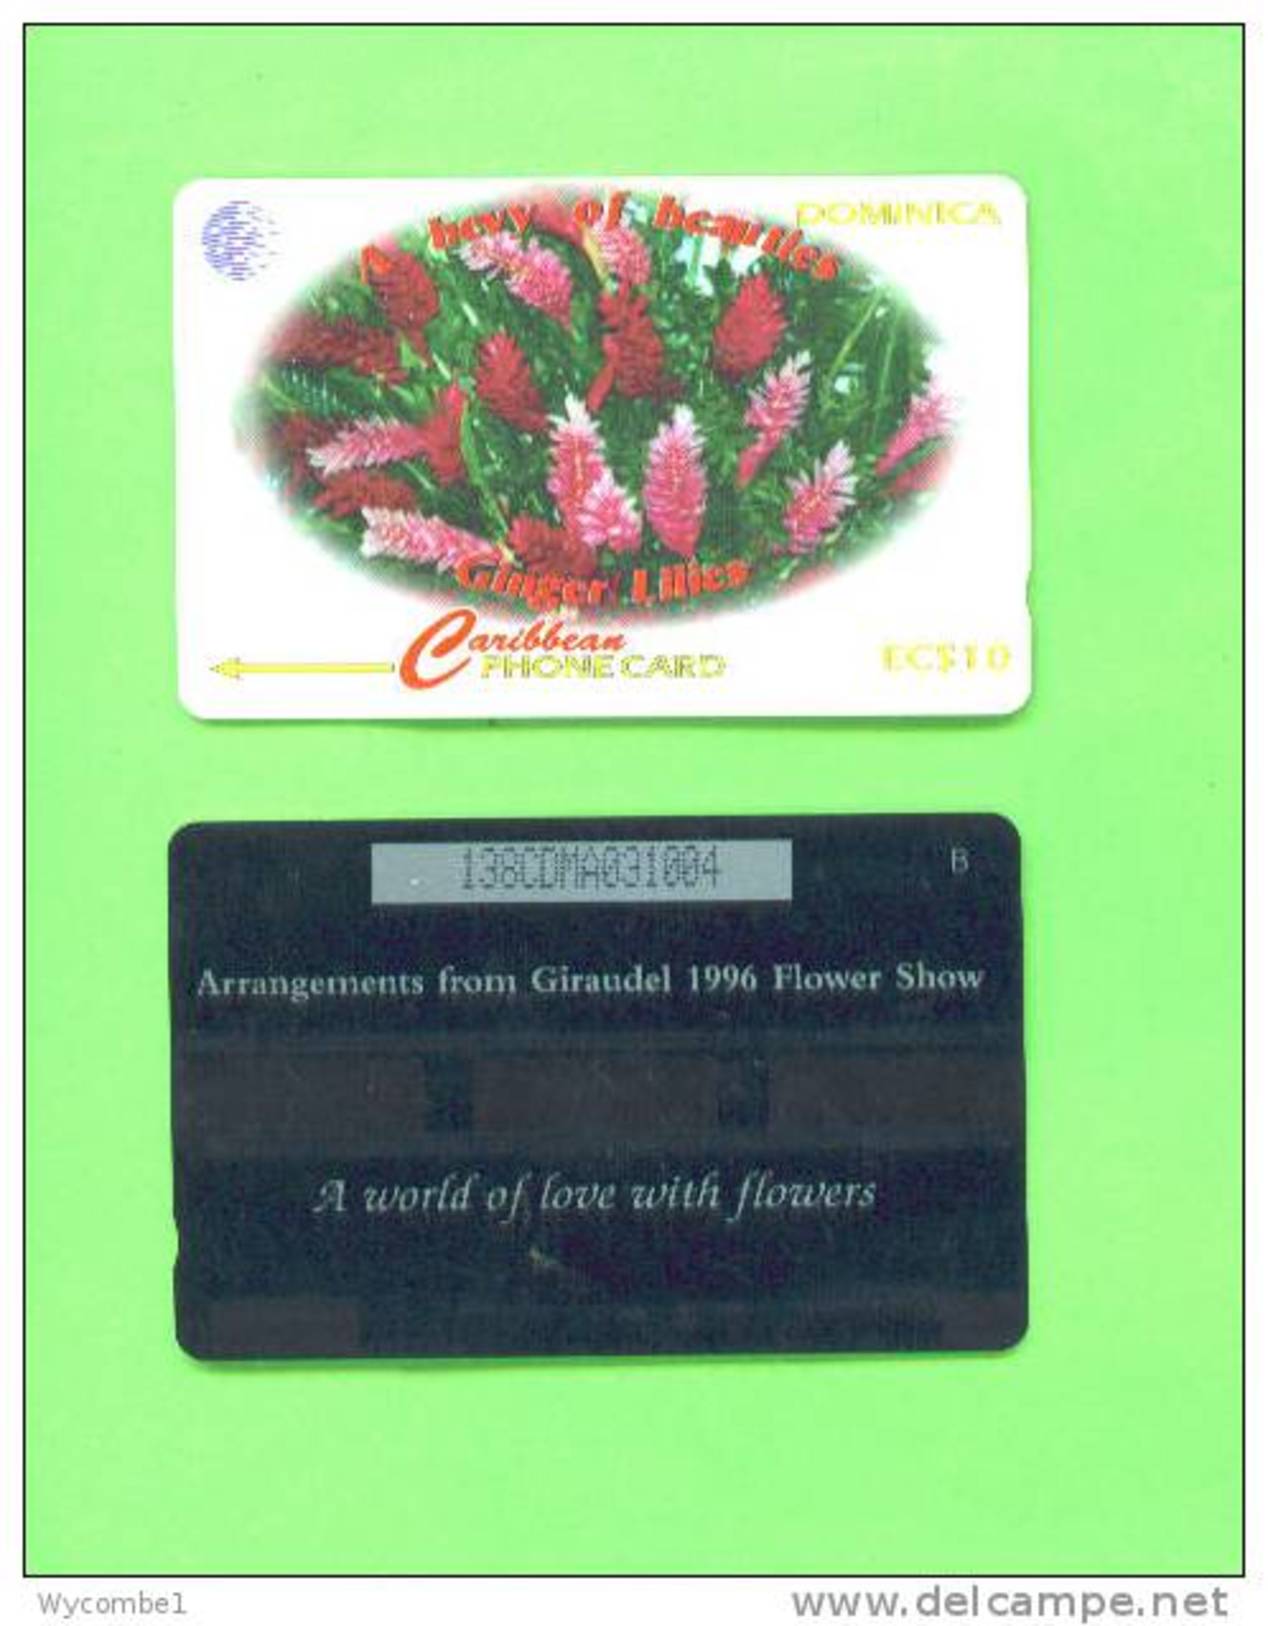 DOMINICA - Magnetic Phonecard/Ginger Lilies - Dominica